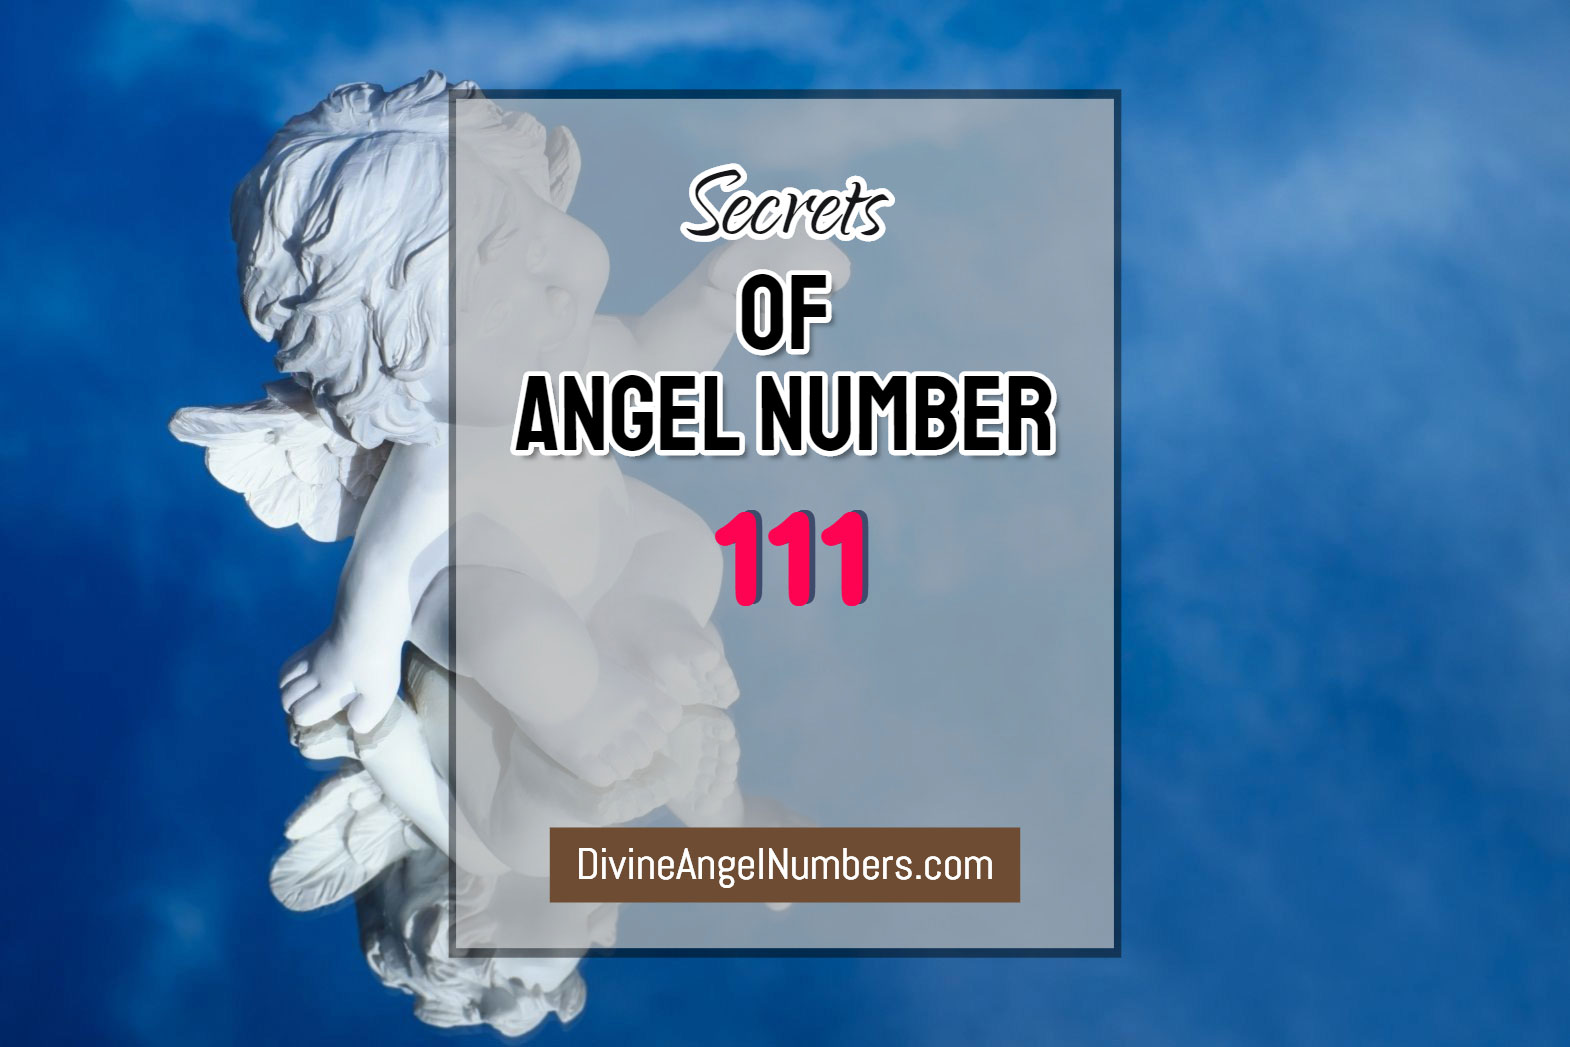 5 Reasons Why You Are Seeing Angel Number 111 - Meaning Of 111